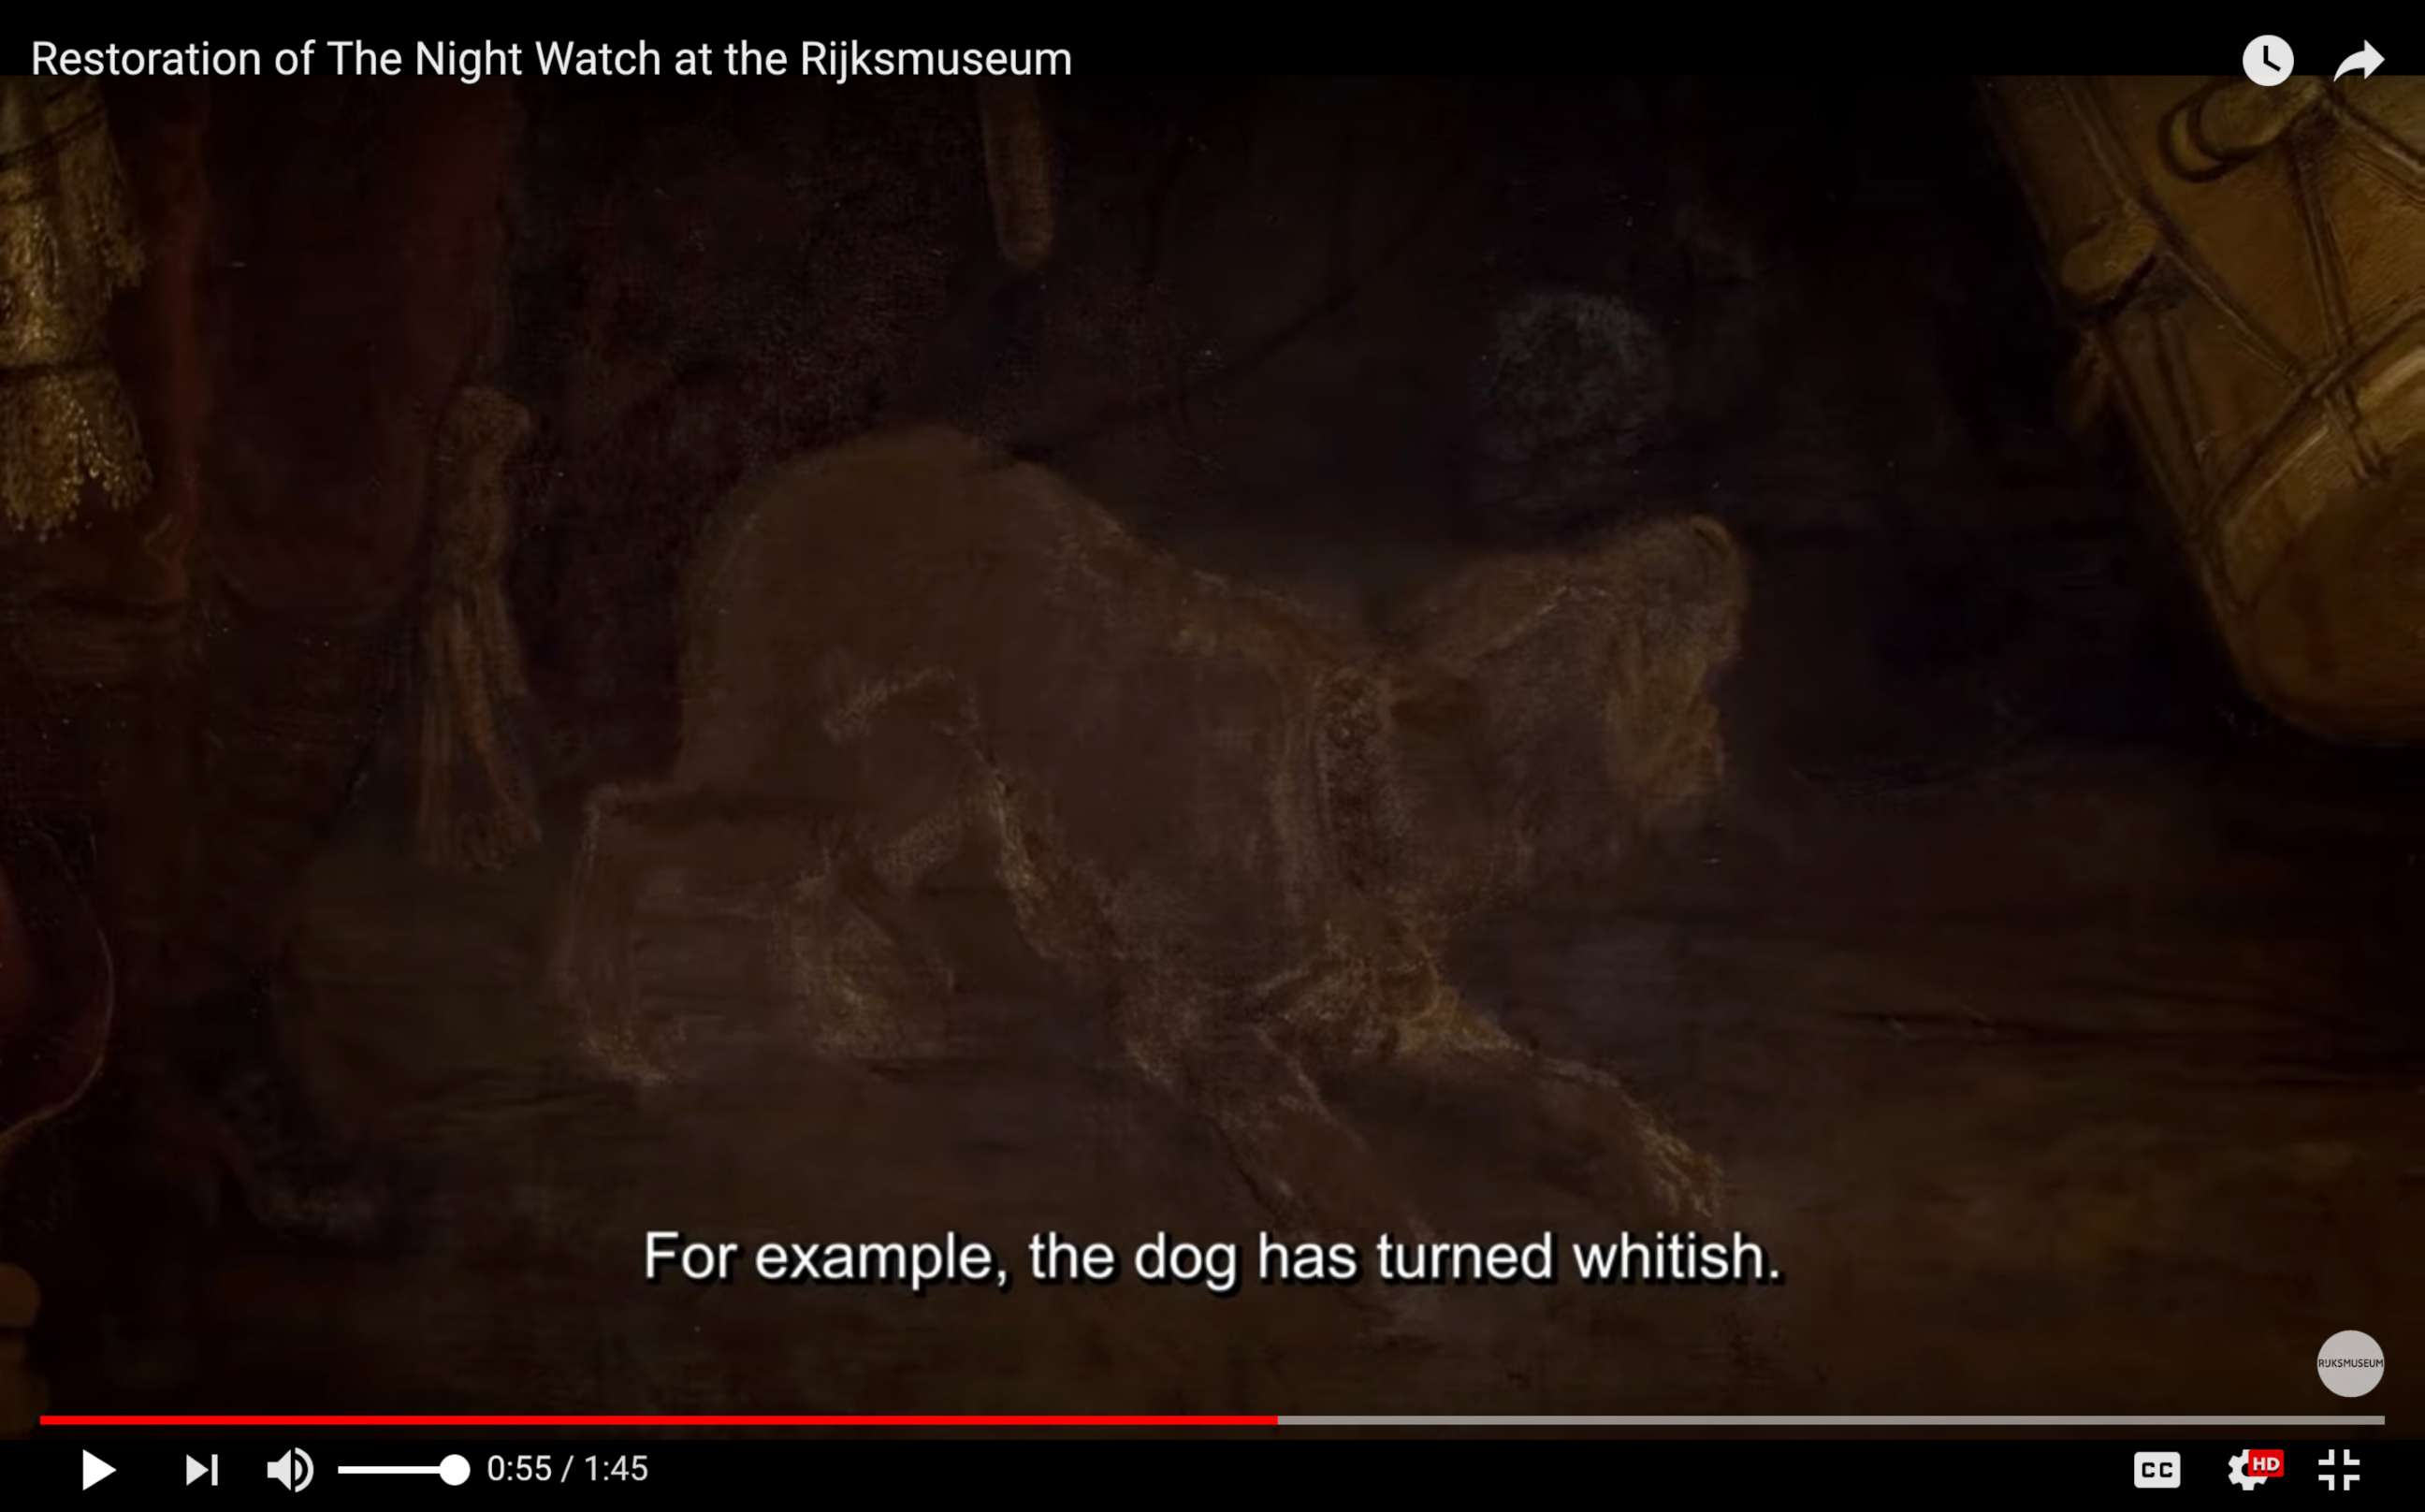 PHOTO: Screen grab from video posted by Rijksmuseum shows a detail from Rembrandt's painting "The Night Watch" of a dog that has faded over the years.